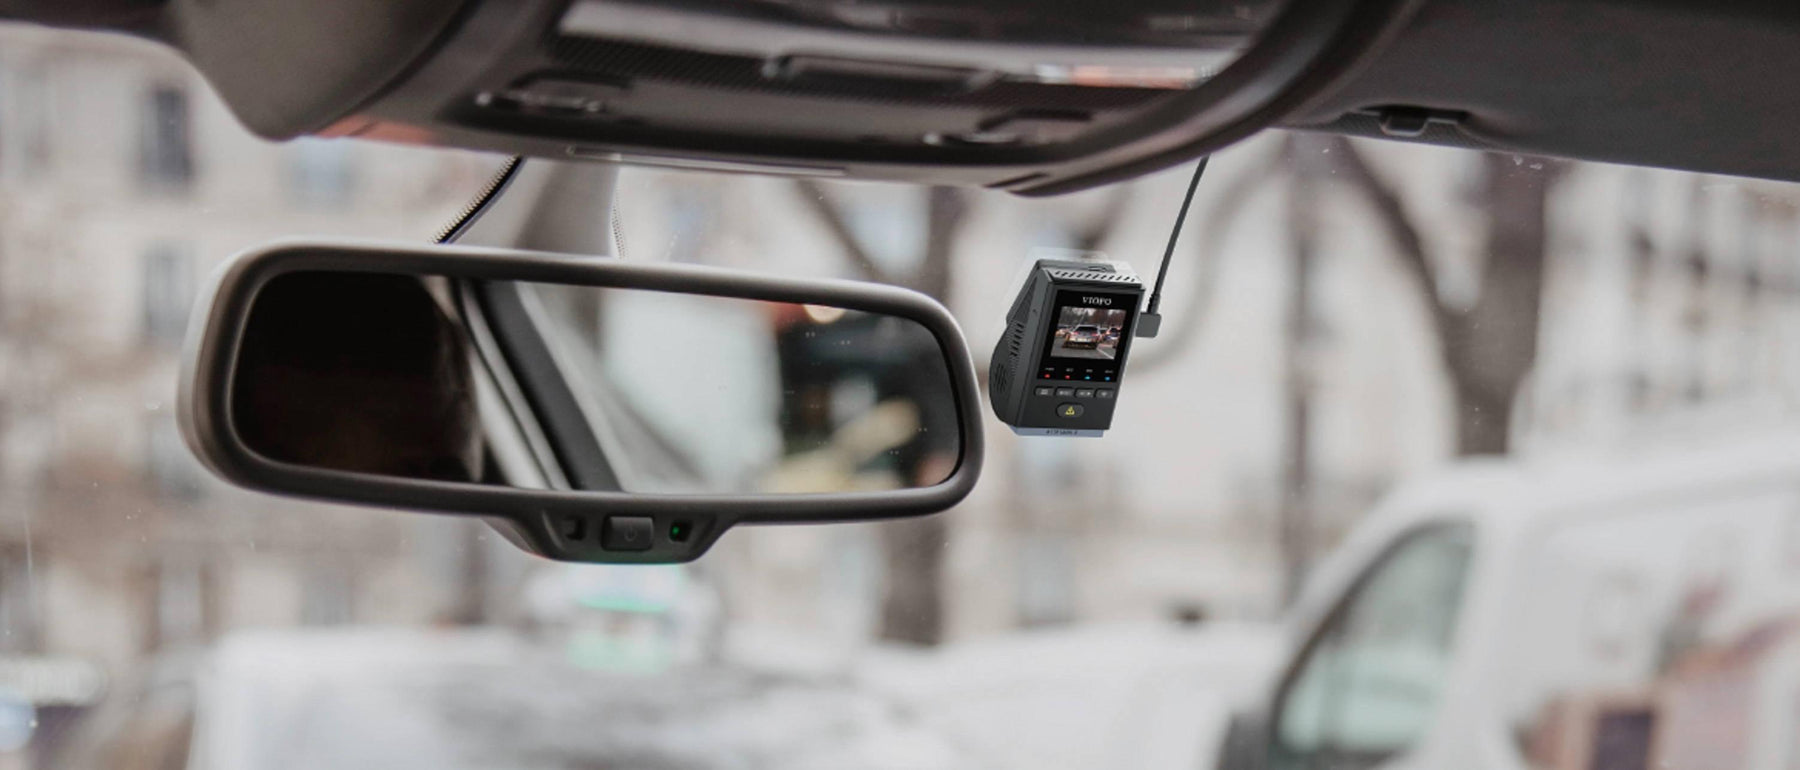 Transfer VIOFO Dash Cam recordings directly to your phone with Type-C cables - - BlackboxMyCar Canada